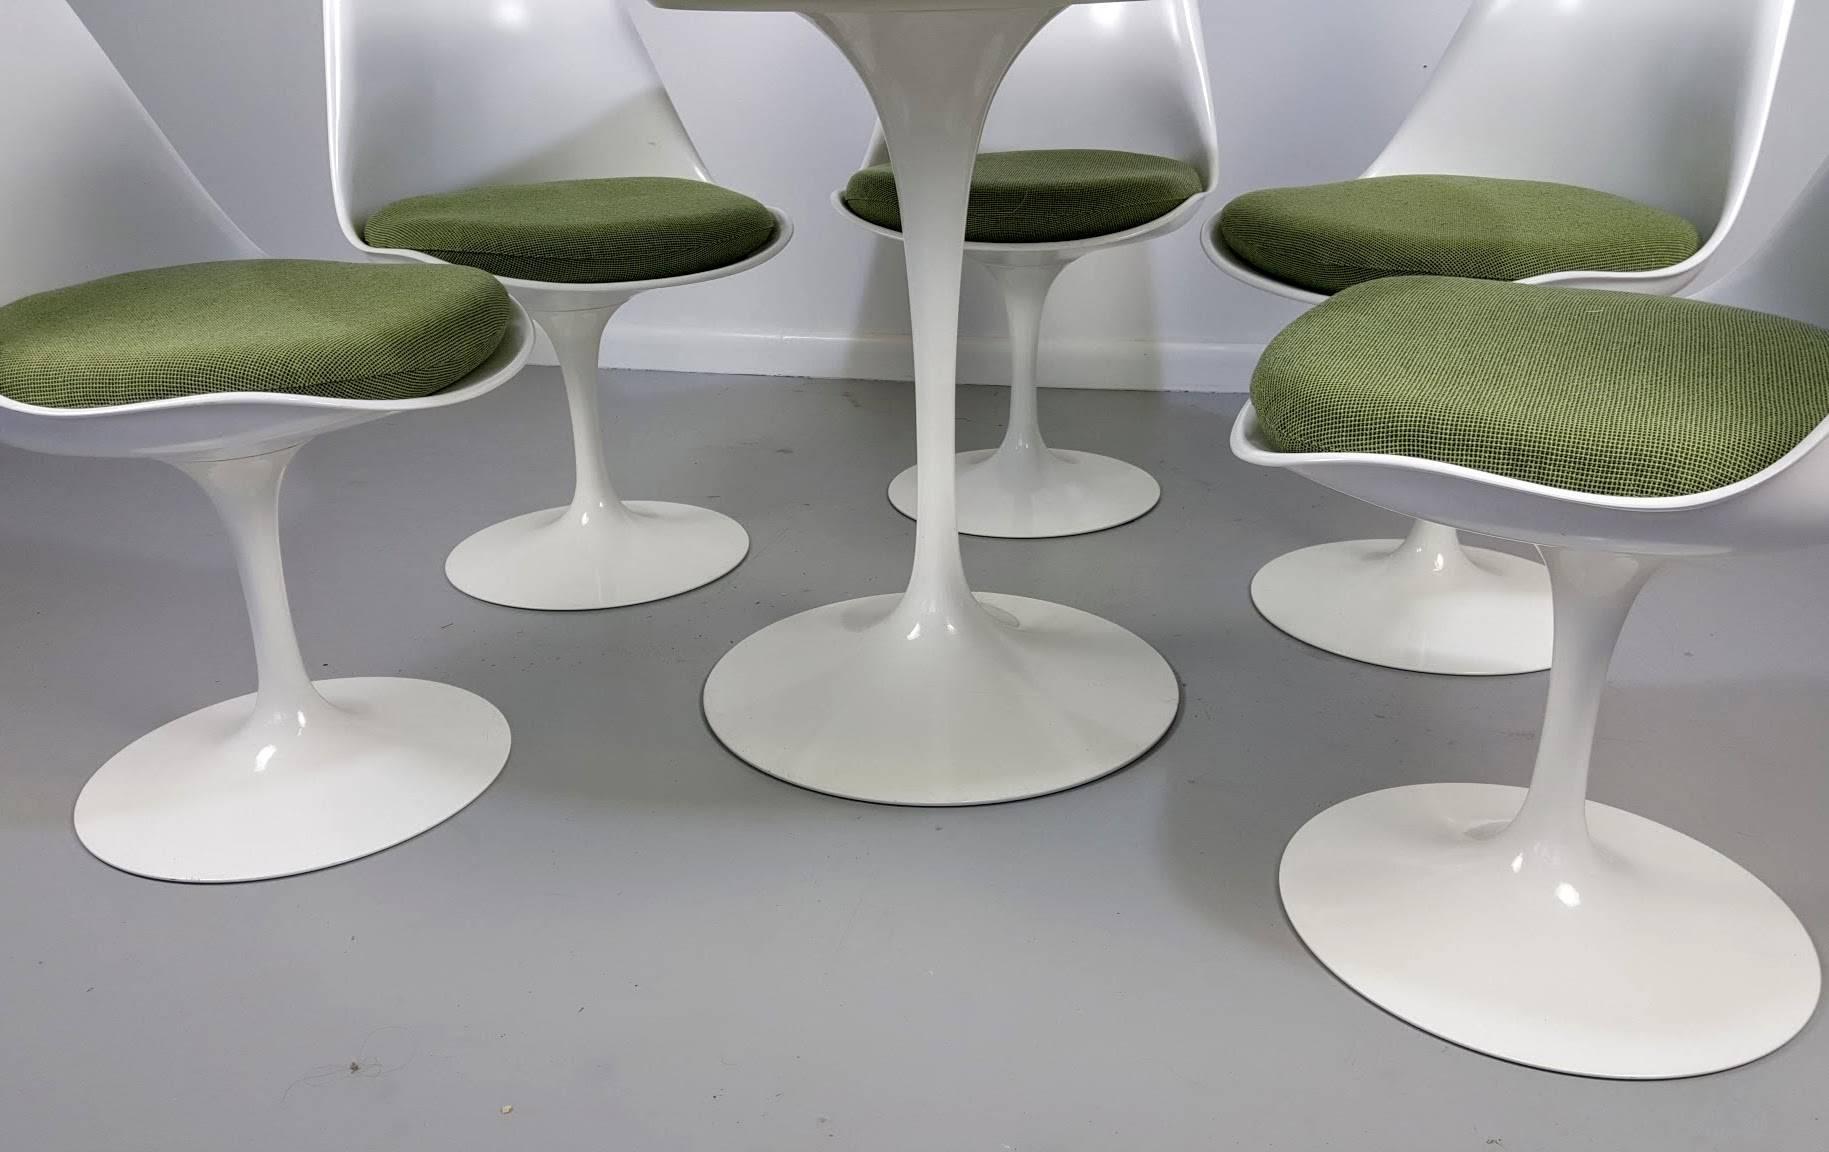 Saarinen tulip table and chairs by Knoll, newer production. This set is in excellent condition and appears to be a newer production. Fabric, bases and table top all show very little wear.

Table measures 29